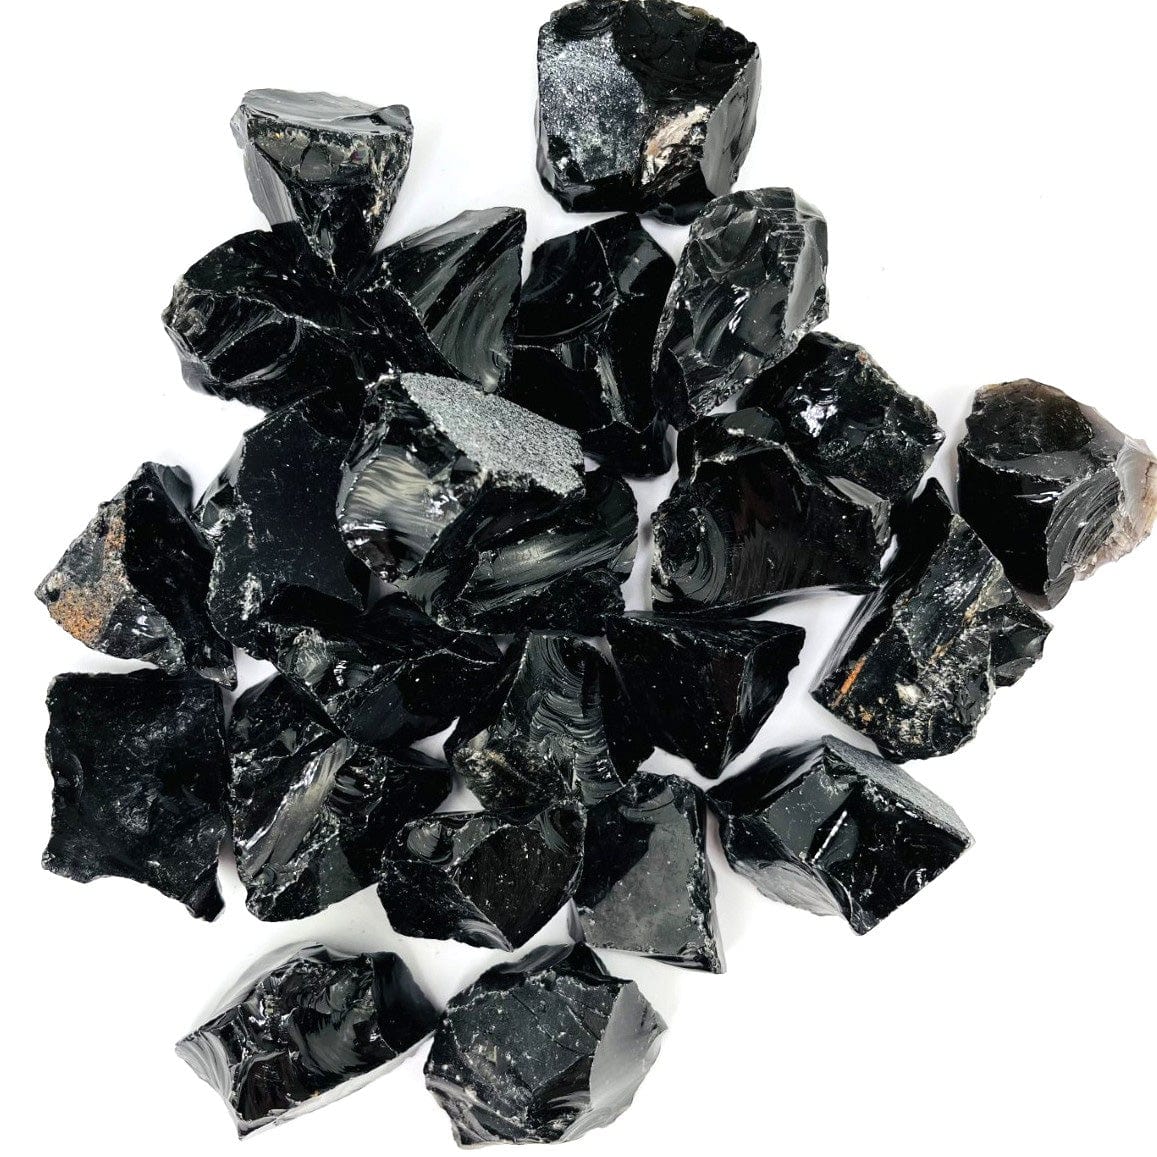 Black Obsidian Natural Stones in a pile